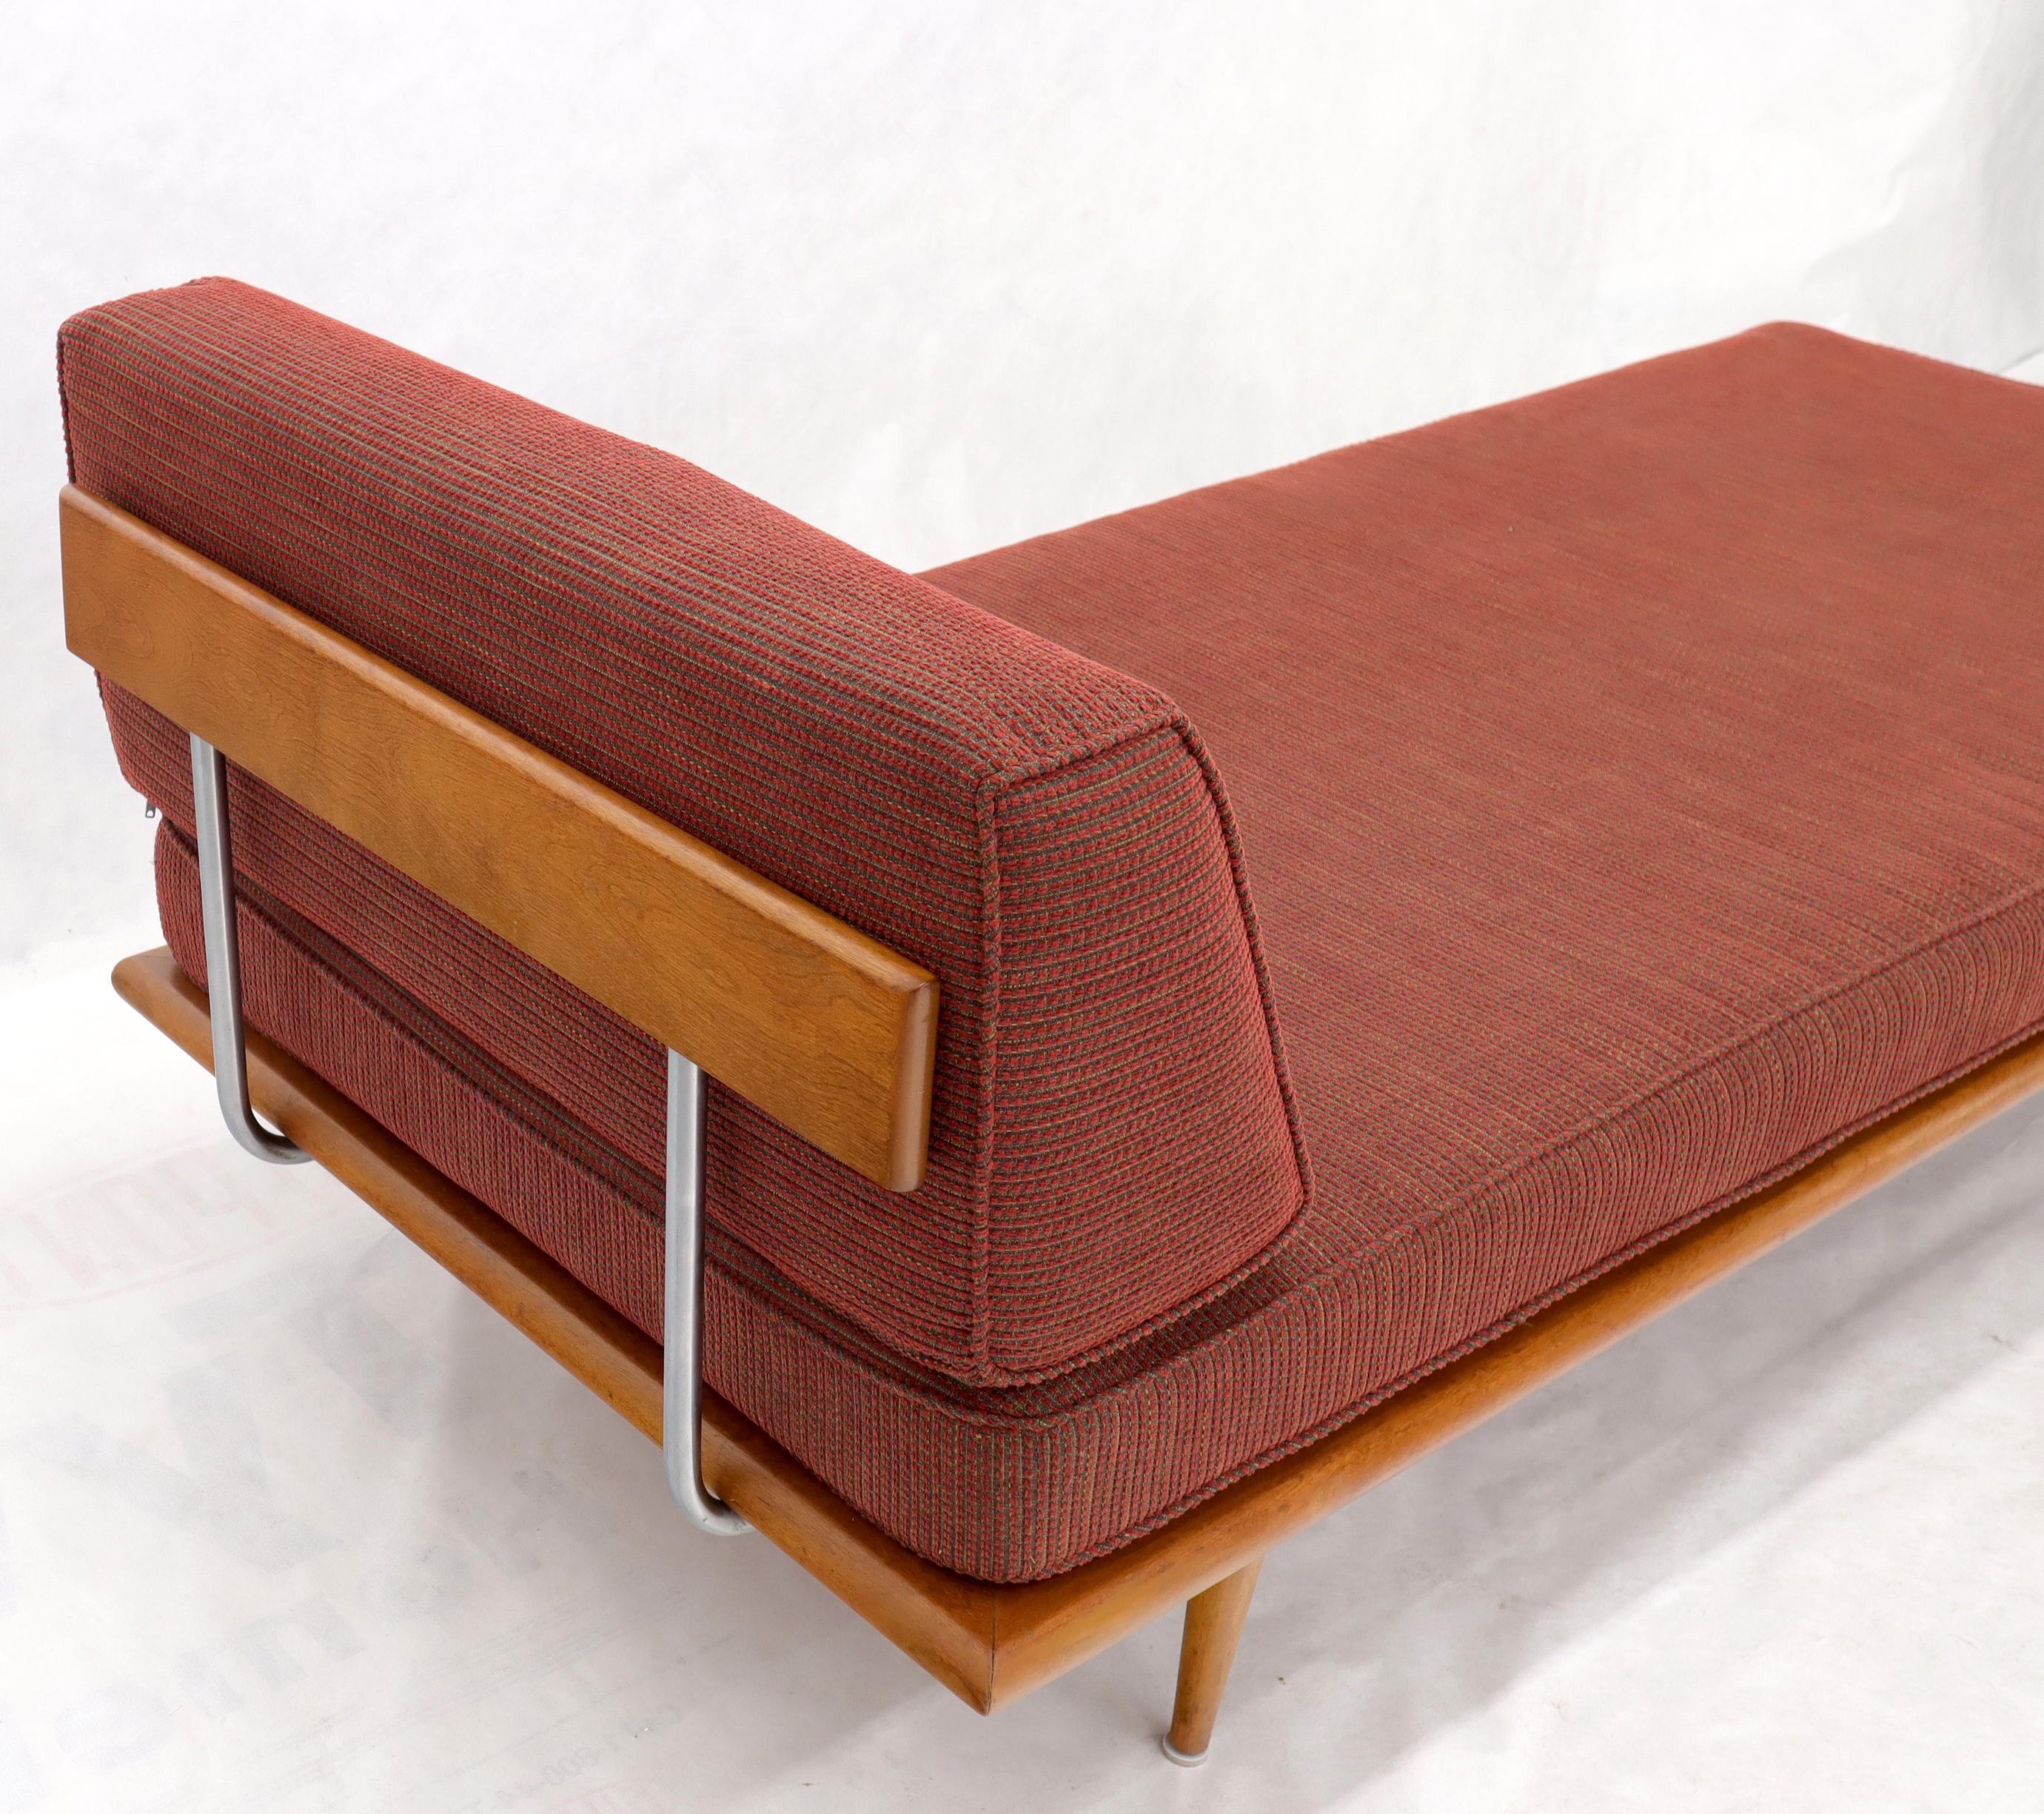 Vintage George Nelson for Herman Miller Daybed Cot Sofa Chaise Lounge 1